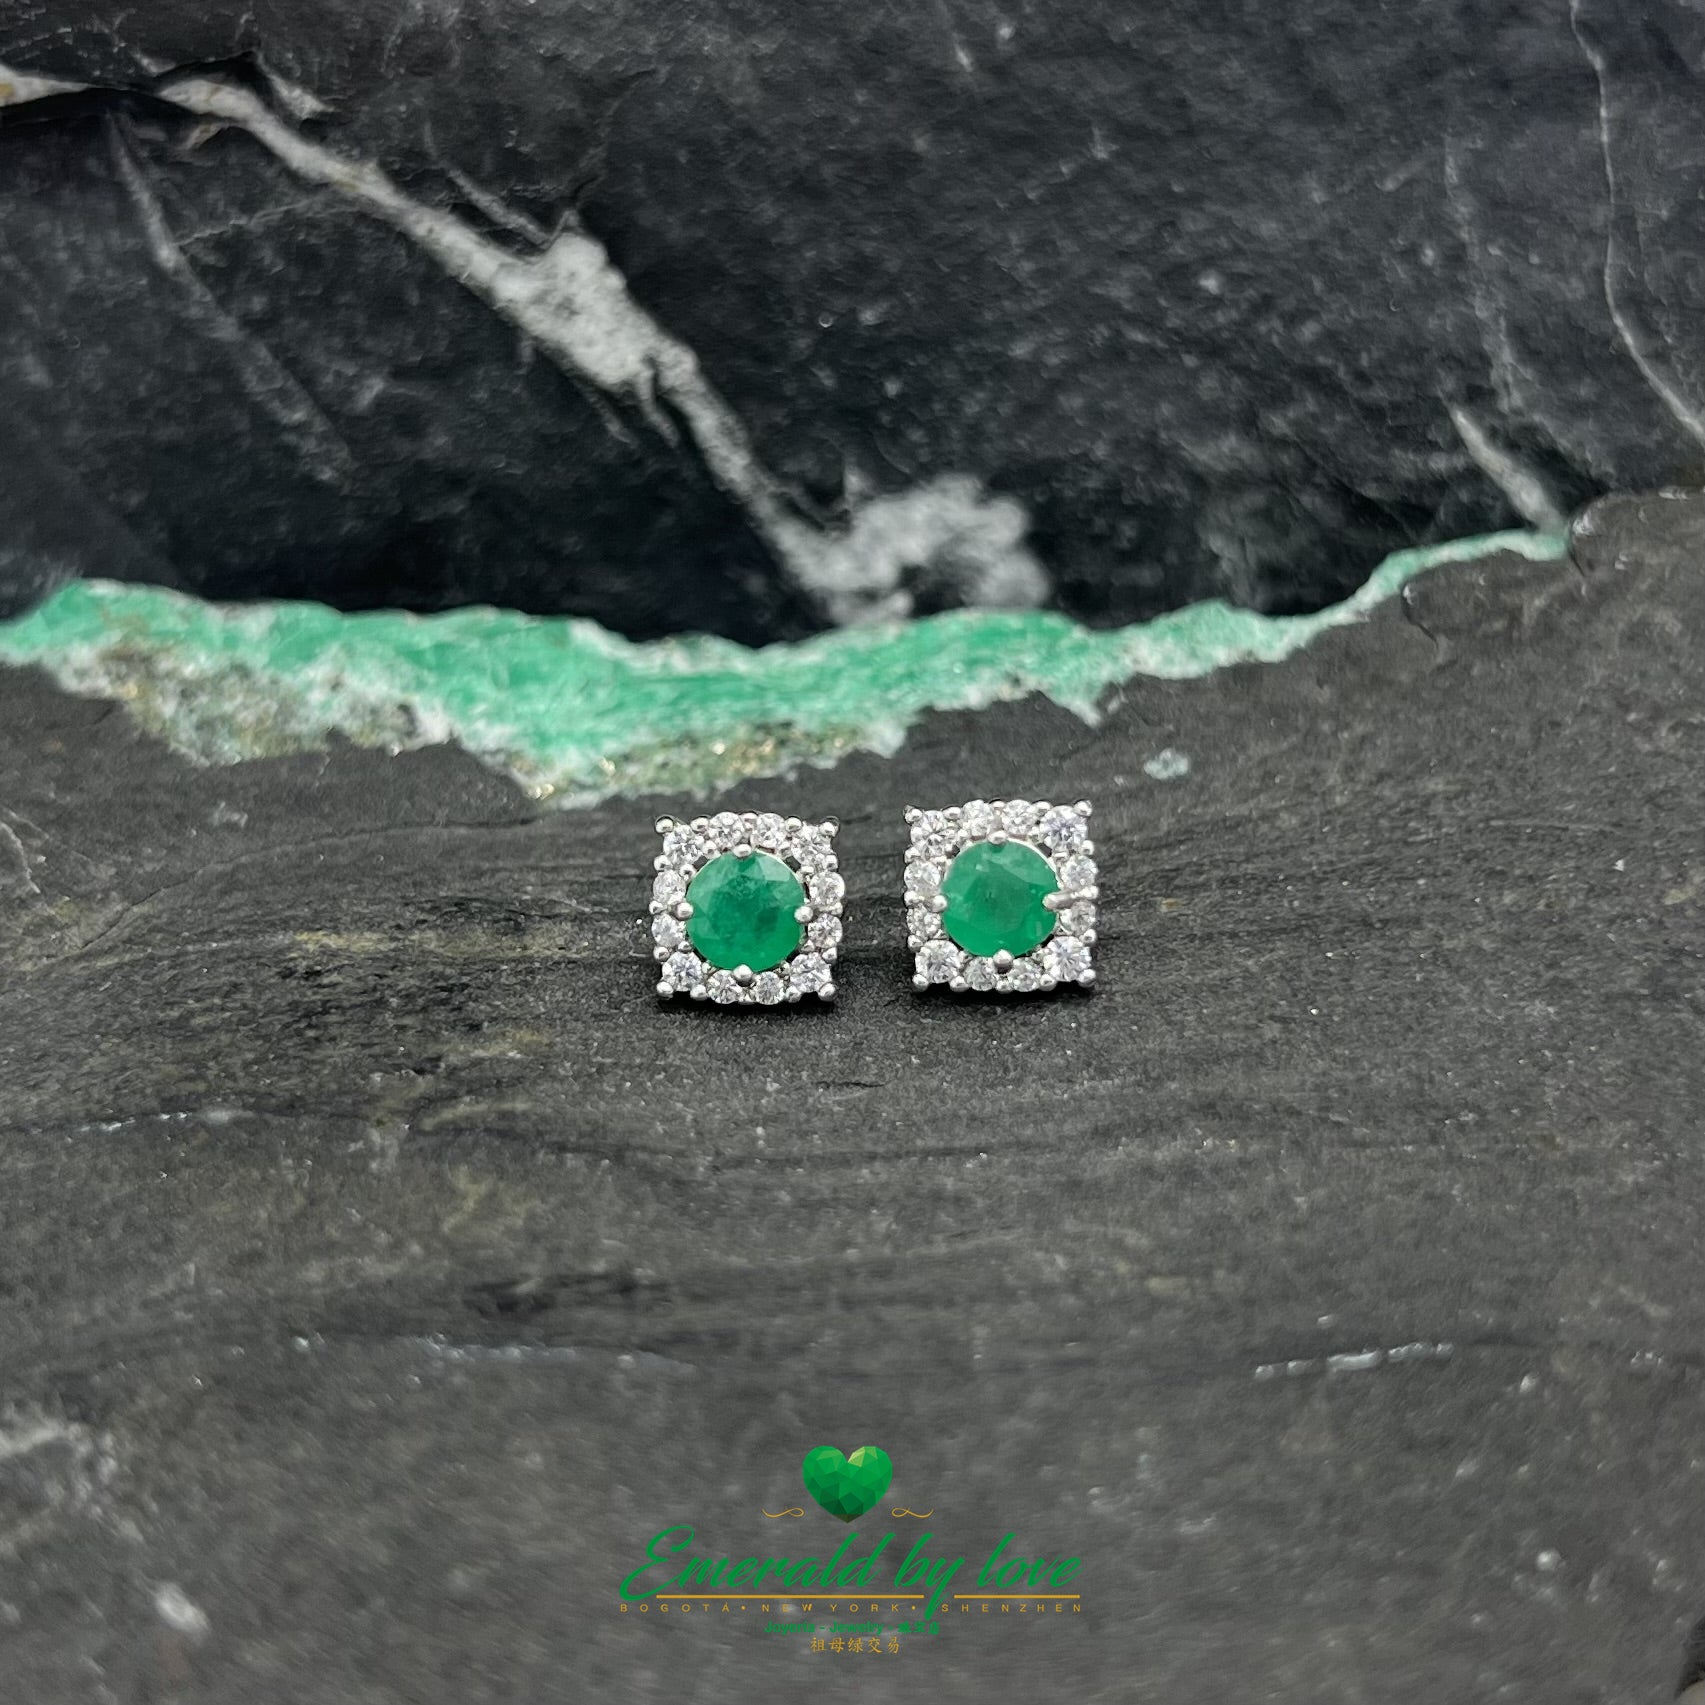 Square Sterling Silver Earrings with Round Central Emerald